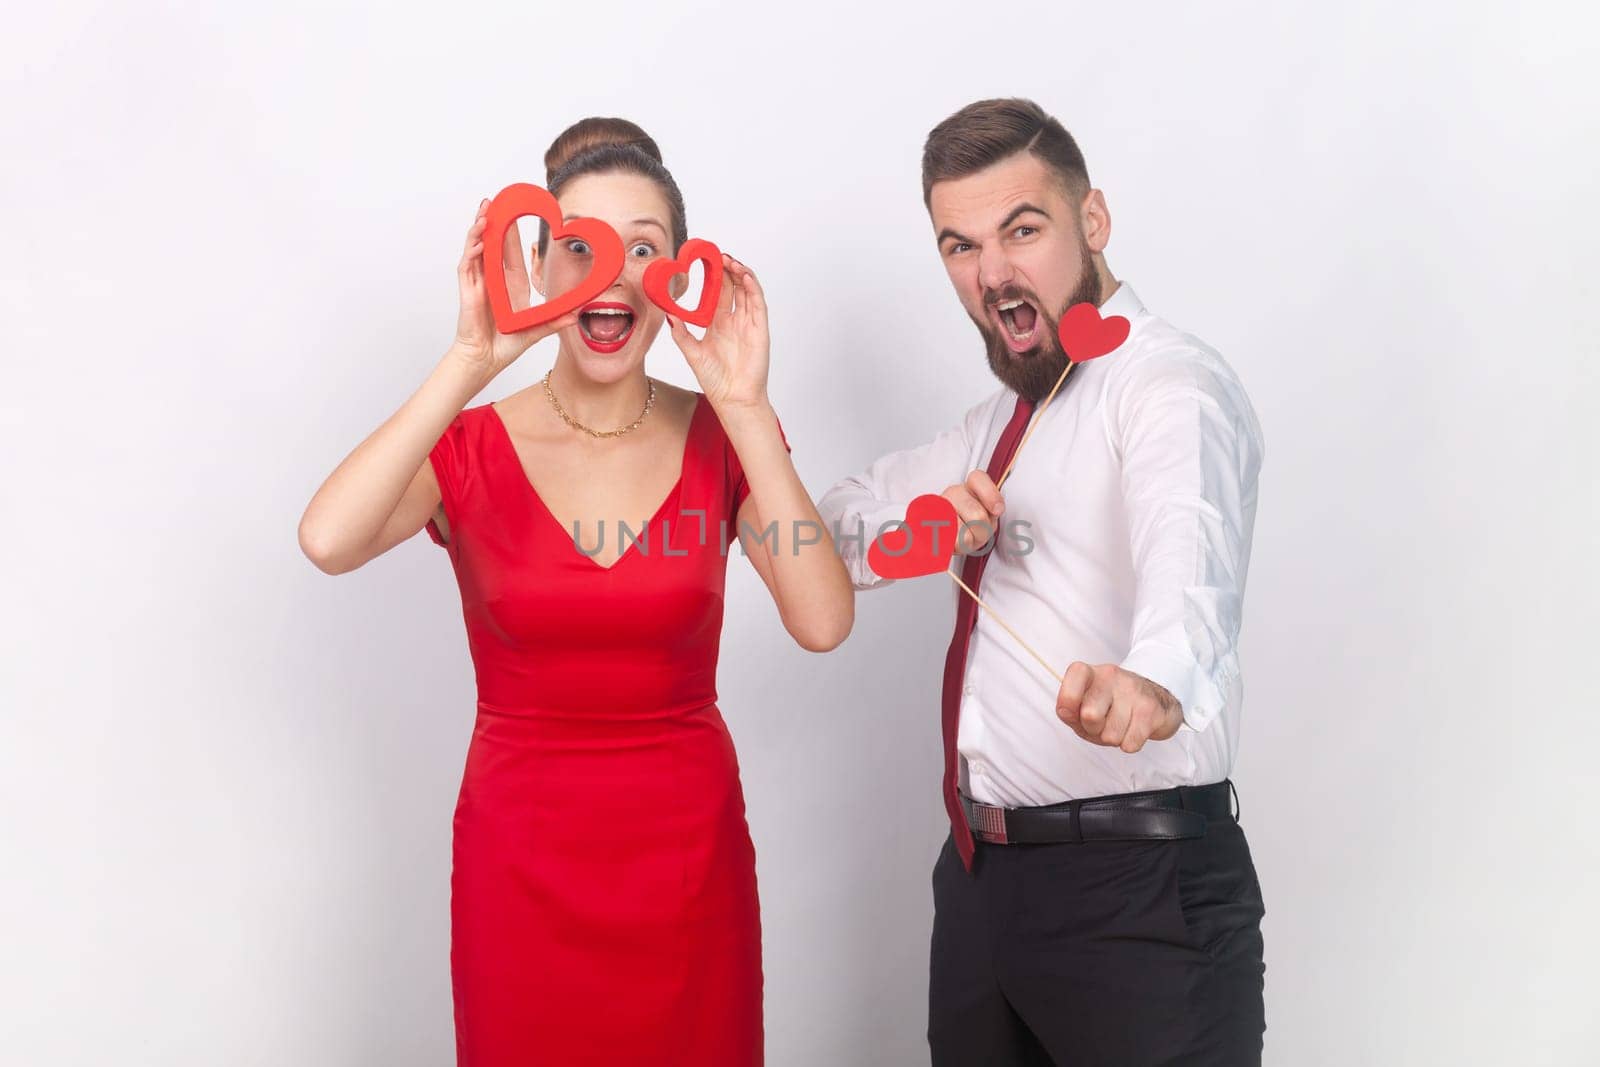 Crazy man and amazed woman in red dress standing together, holding heart figures, being emotive. by Khosro1